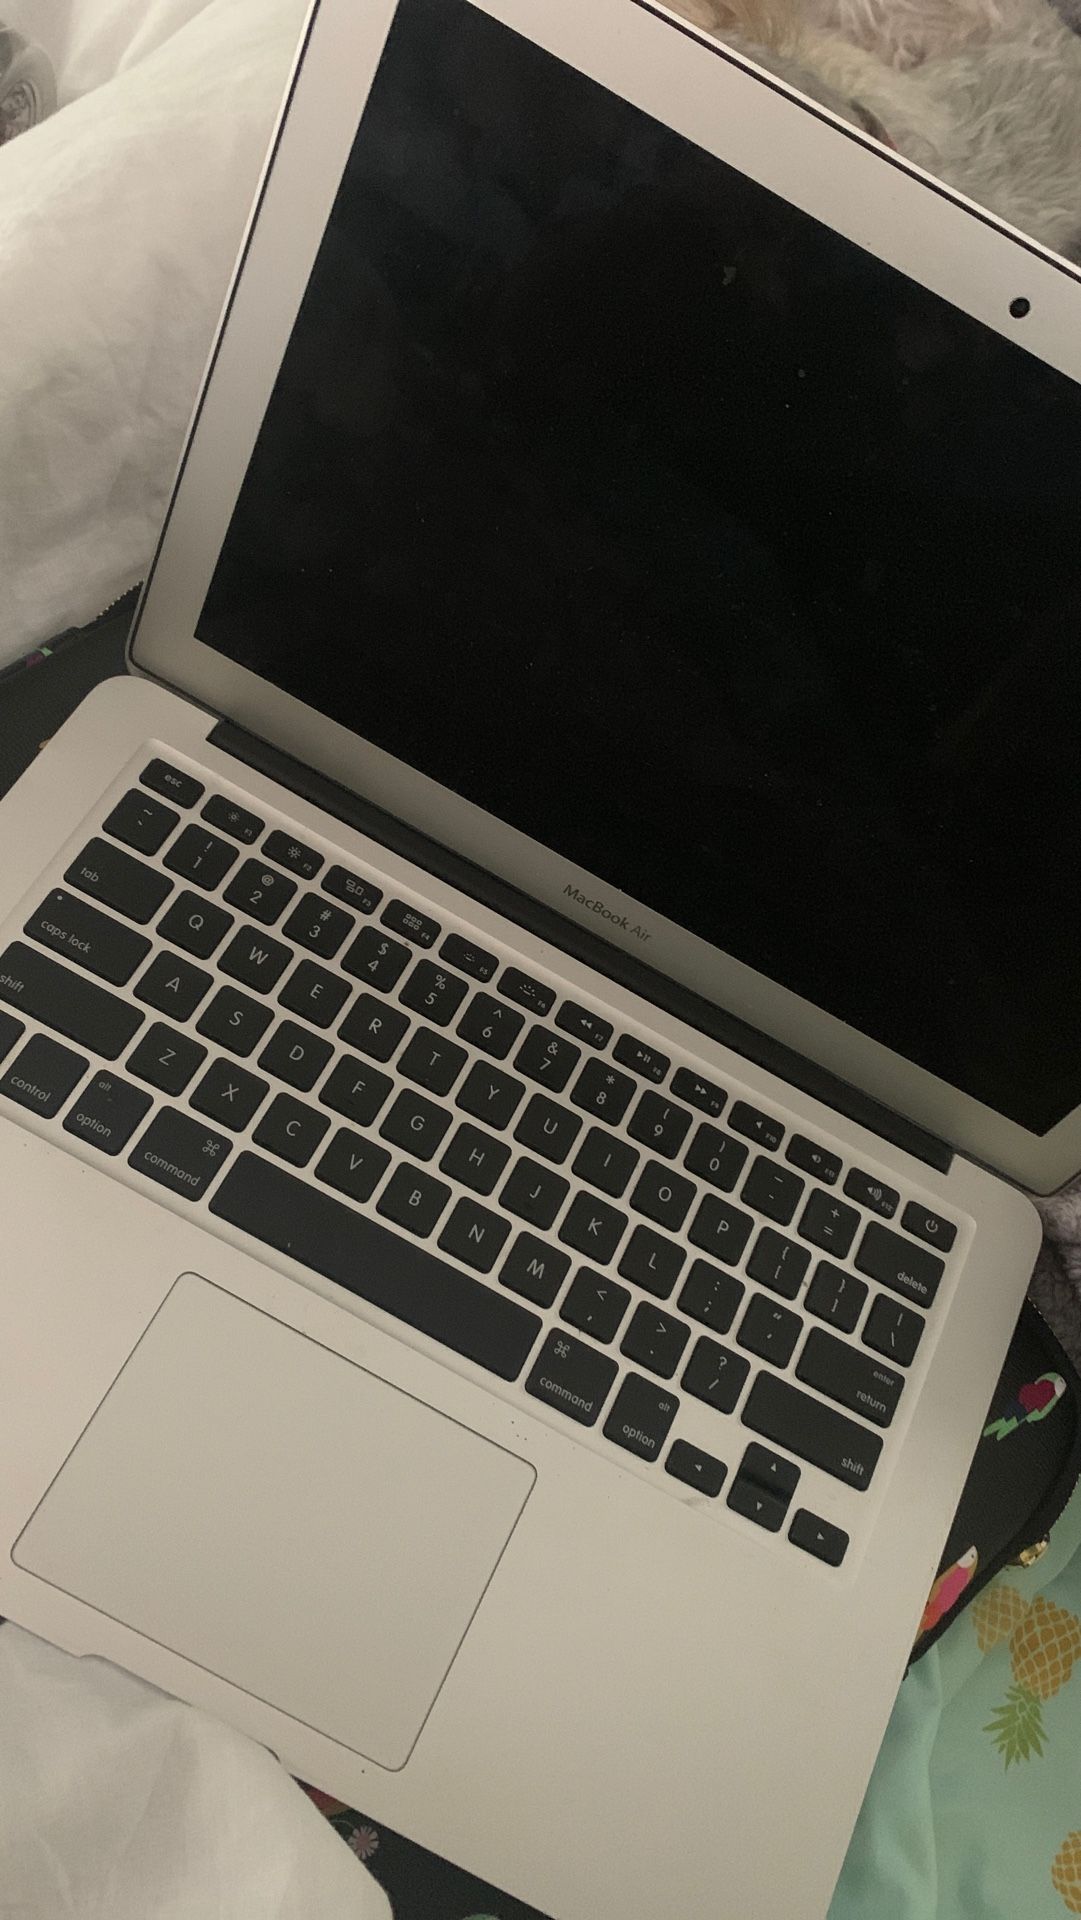 MacBook Air 13 inch. MacOS X 10.7.5. Previously had stickers on it. MacOS HIGH SIERRA. No scratches. Nothing wrong.